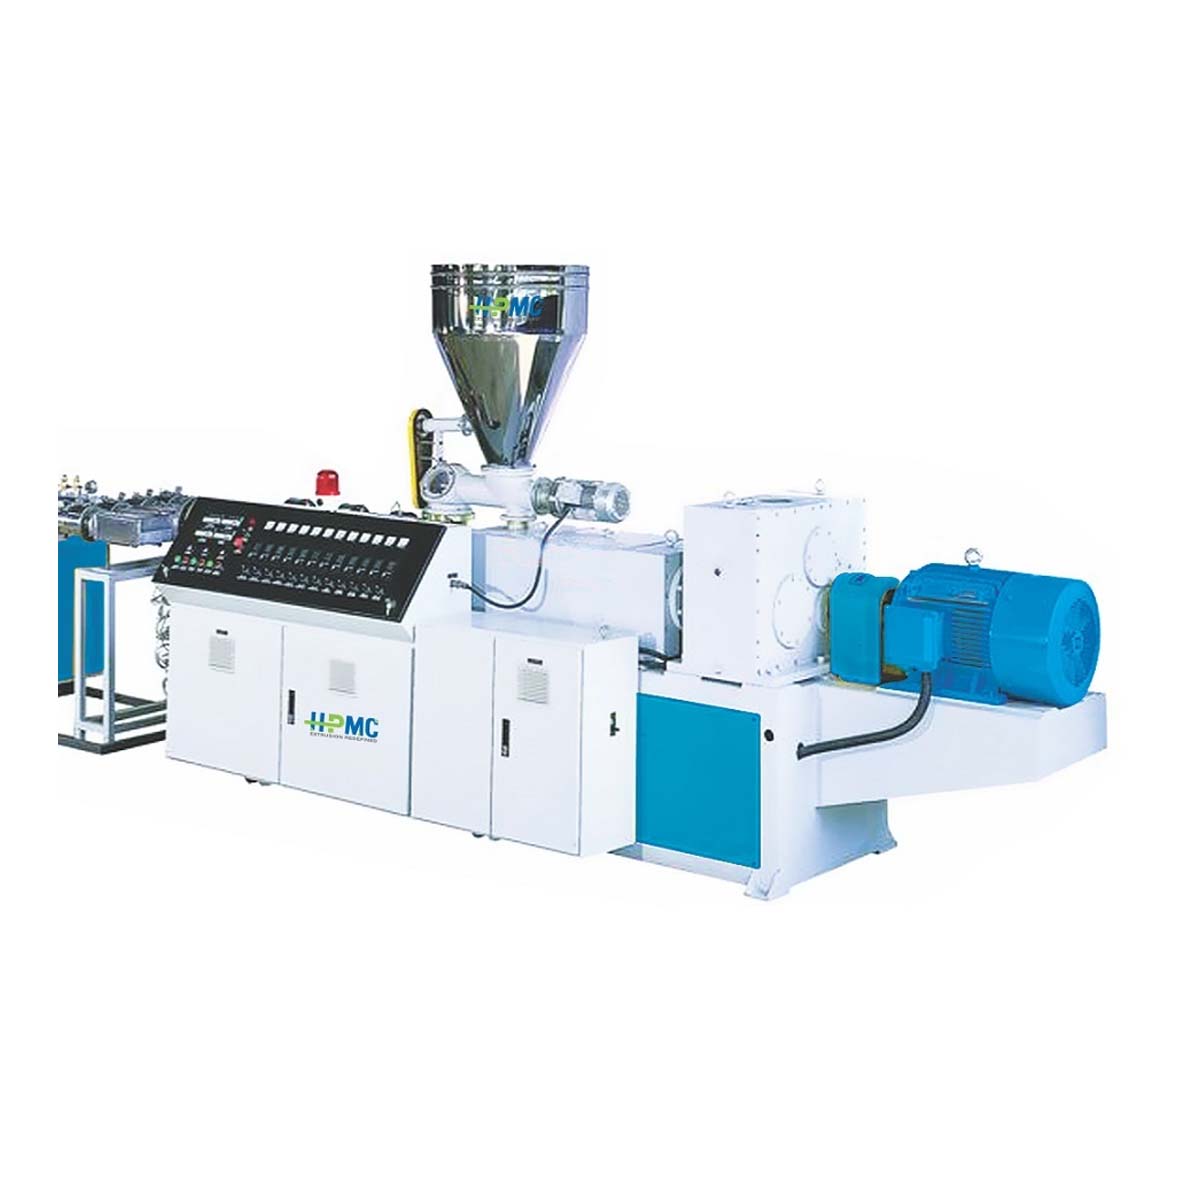 PVC Pipe Twin Screw Extruder Manufacturers, Suppliers and Exporters in Delhi